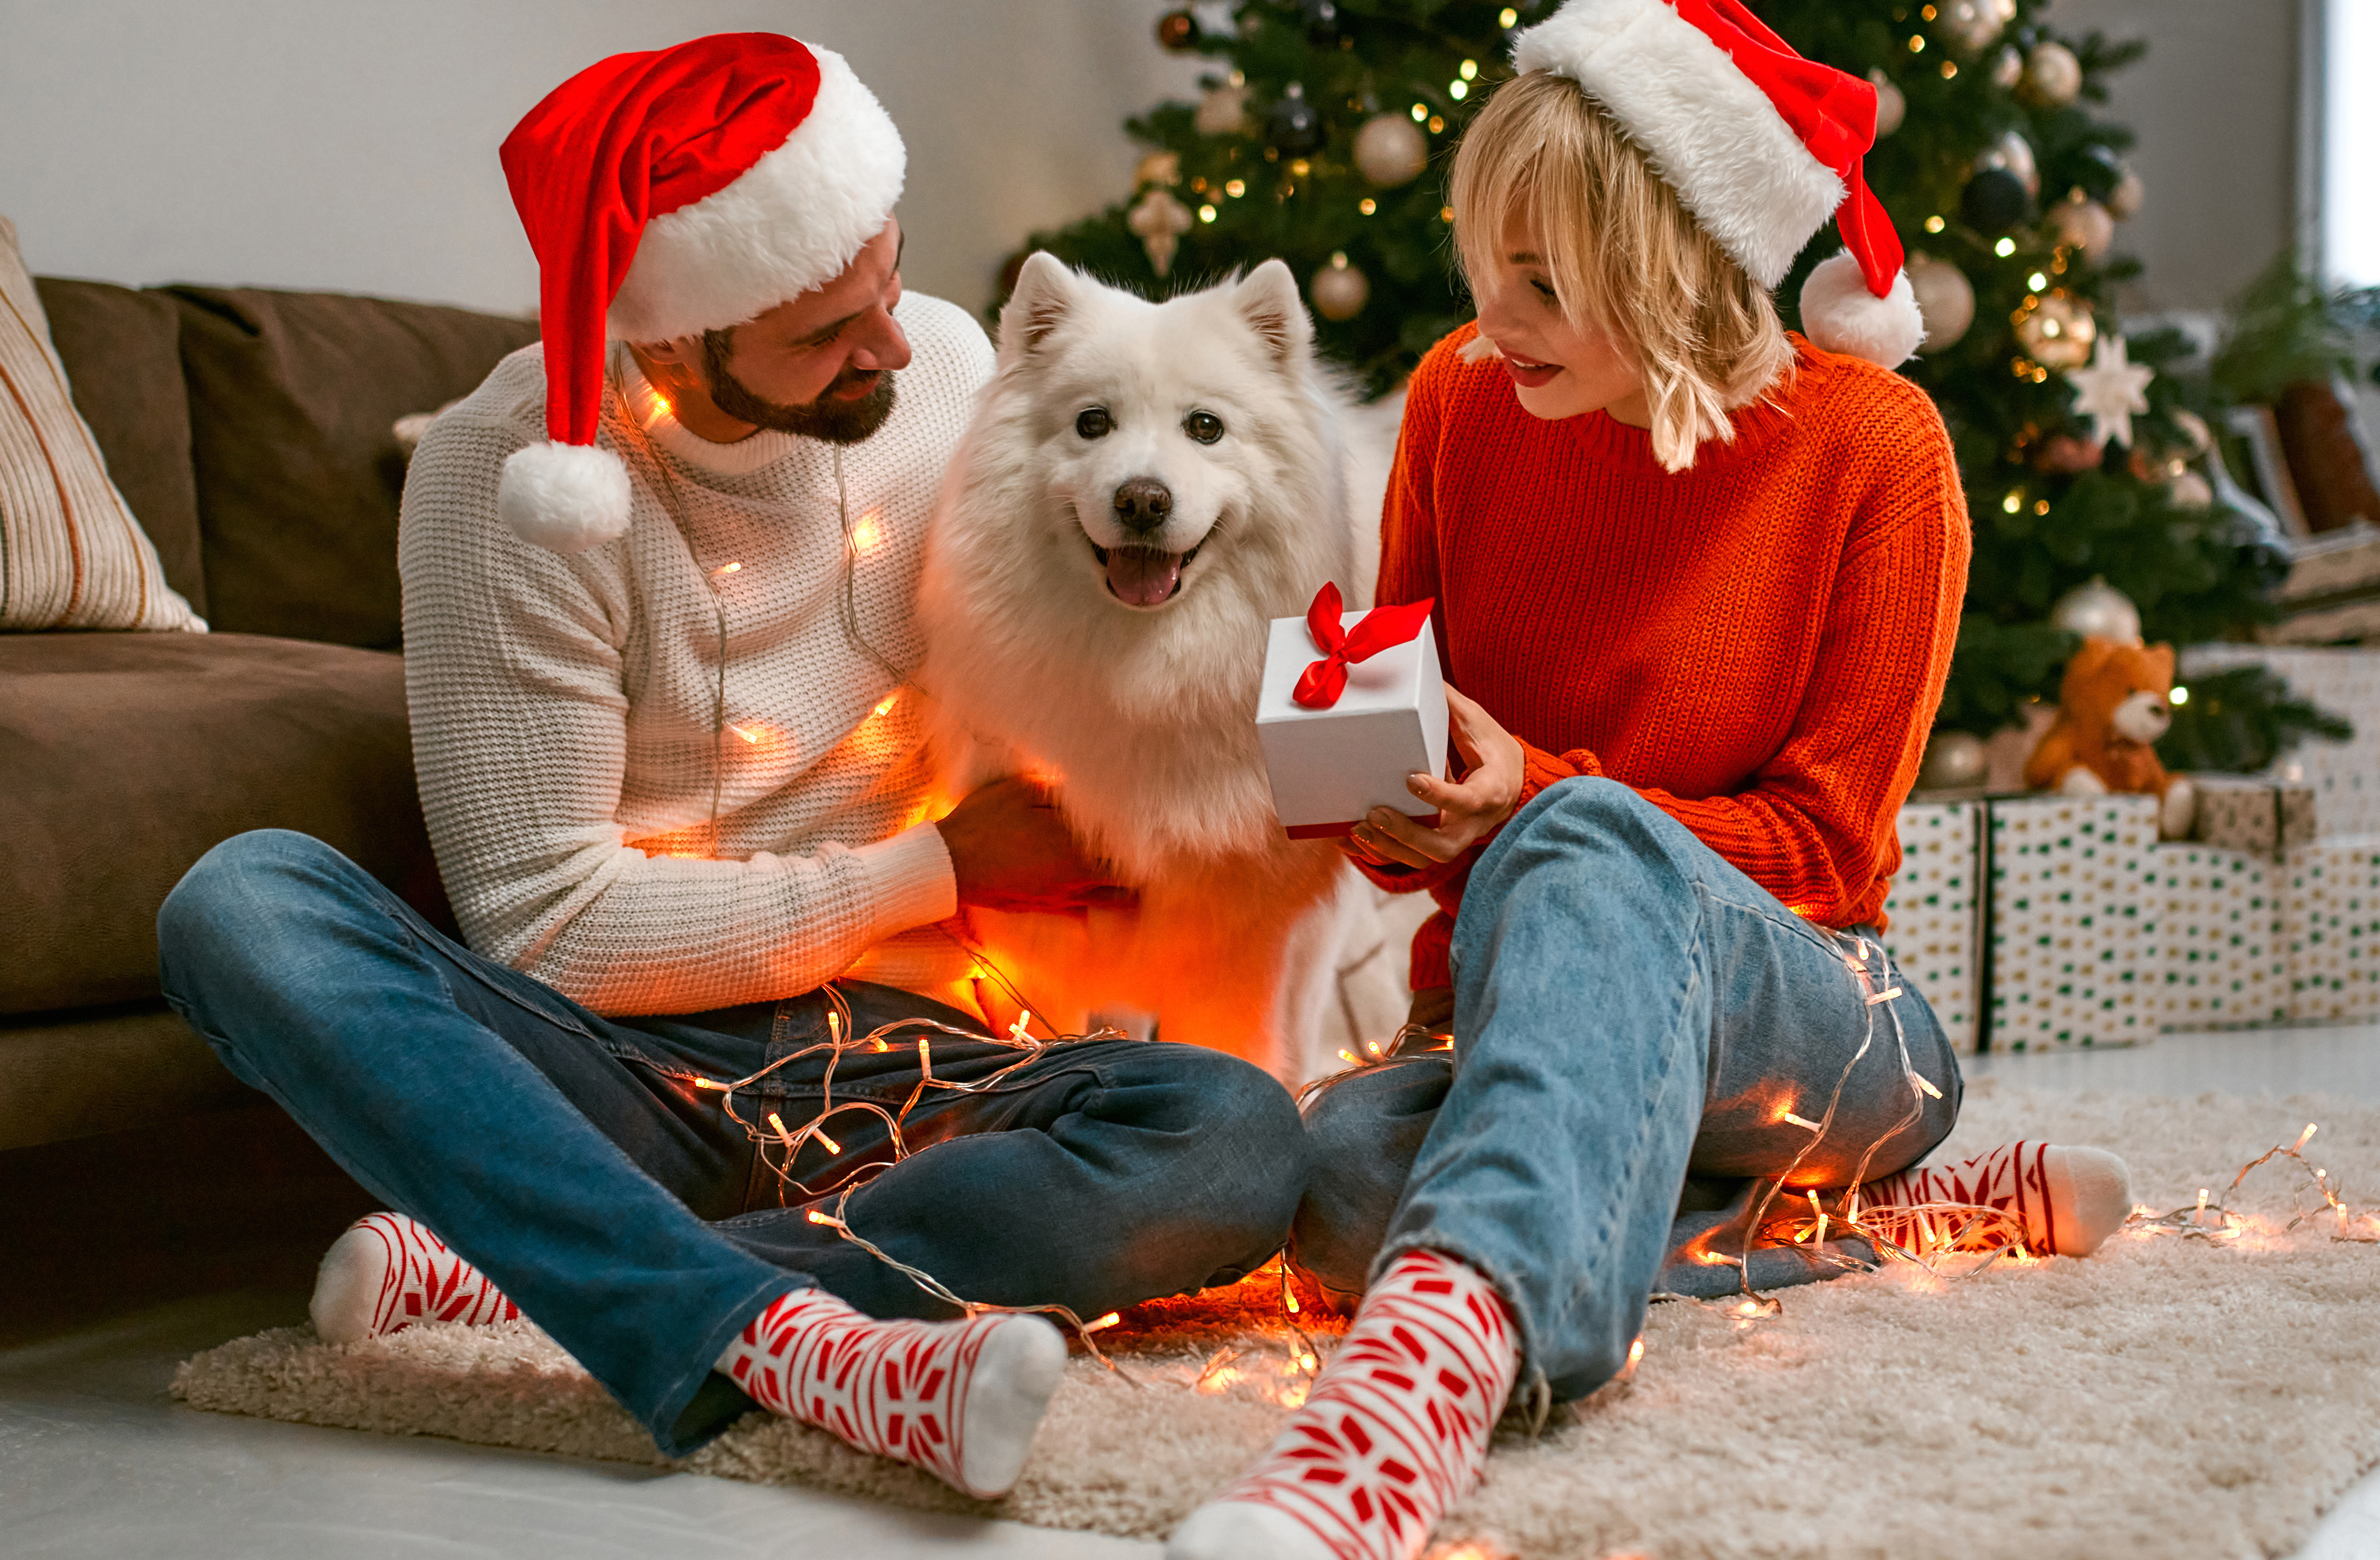 Merry Christmas and Happy New Year! Happy couple with dog is waiting for the New Year together in Santa Claus hats while sitting near beautiful Christmas tree at home.